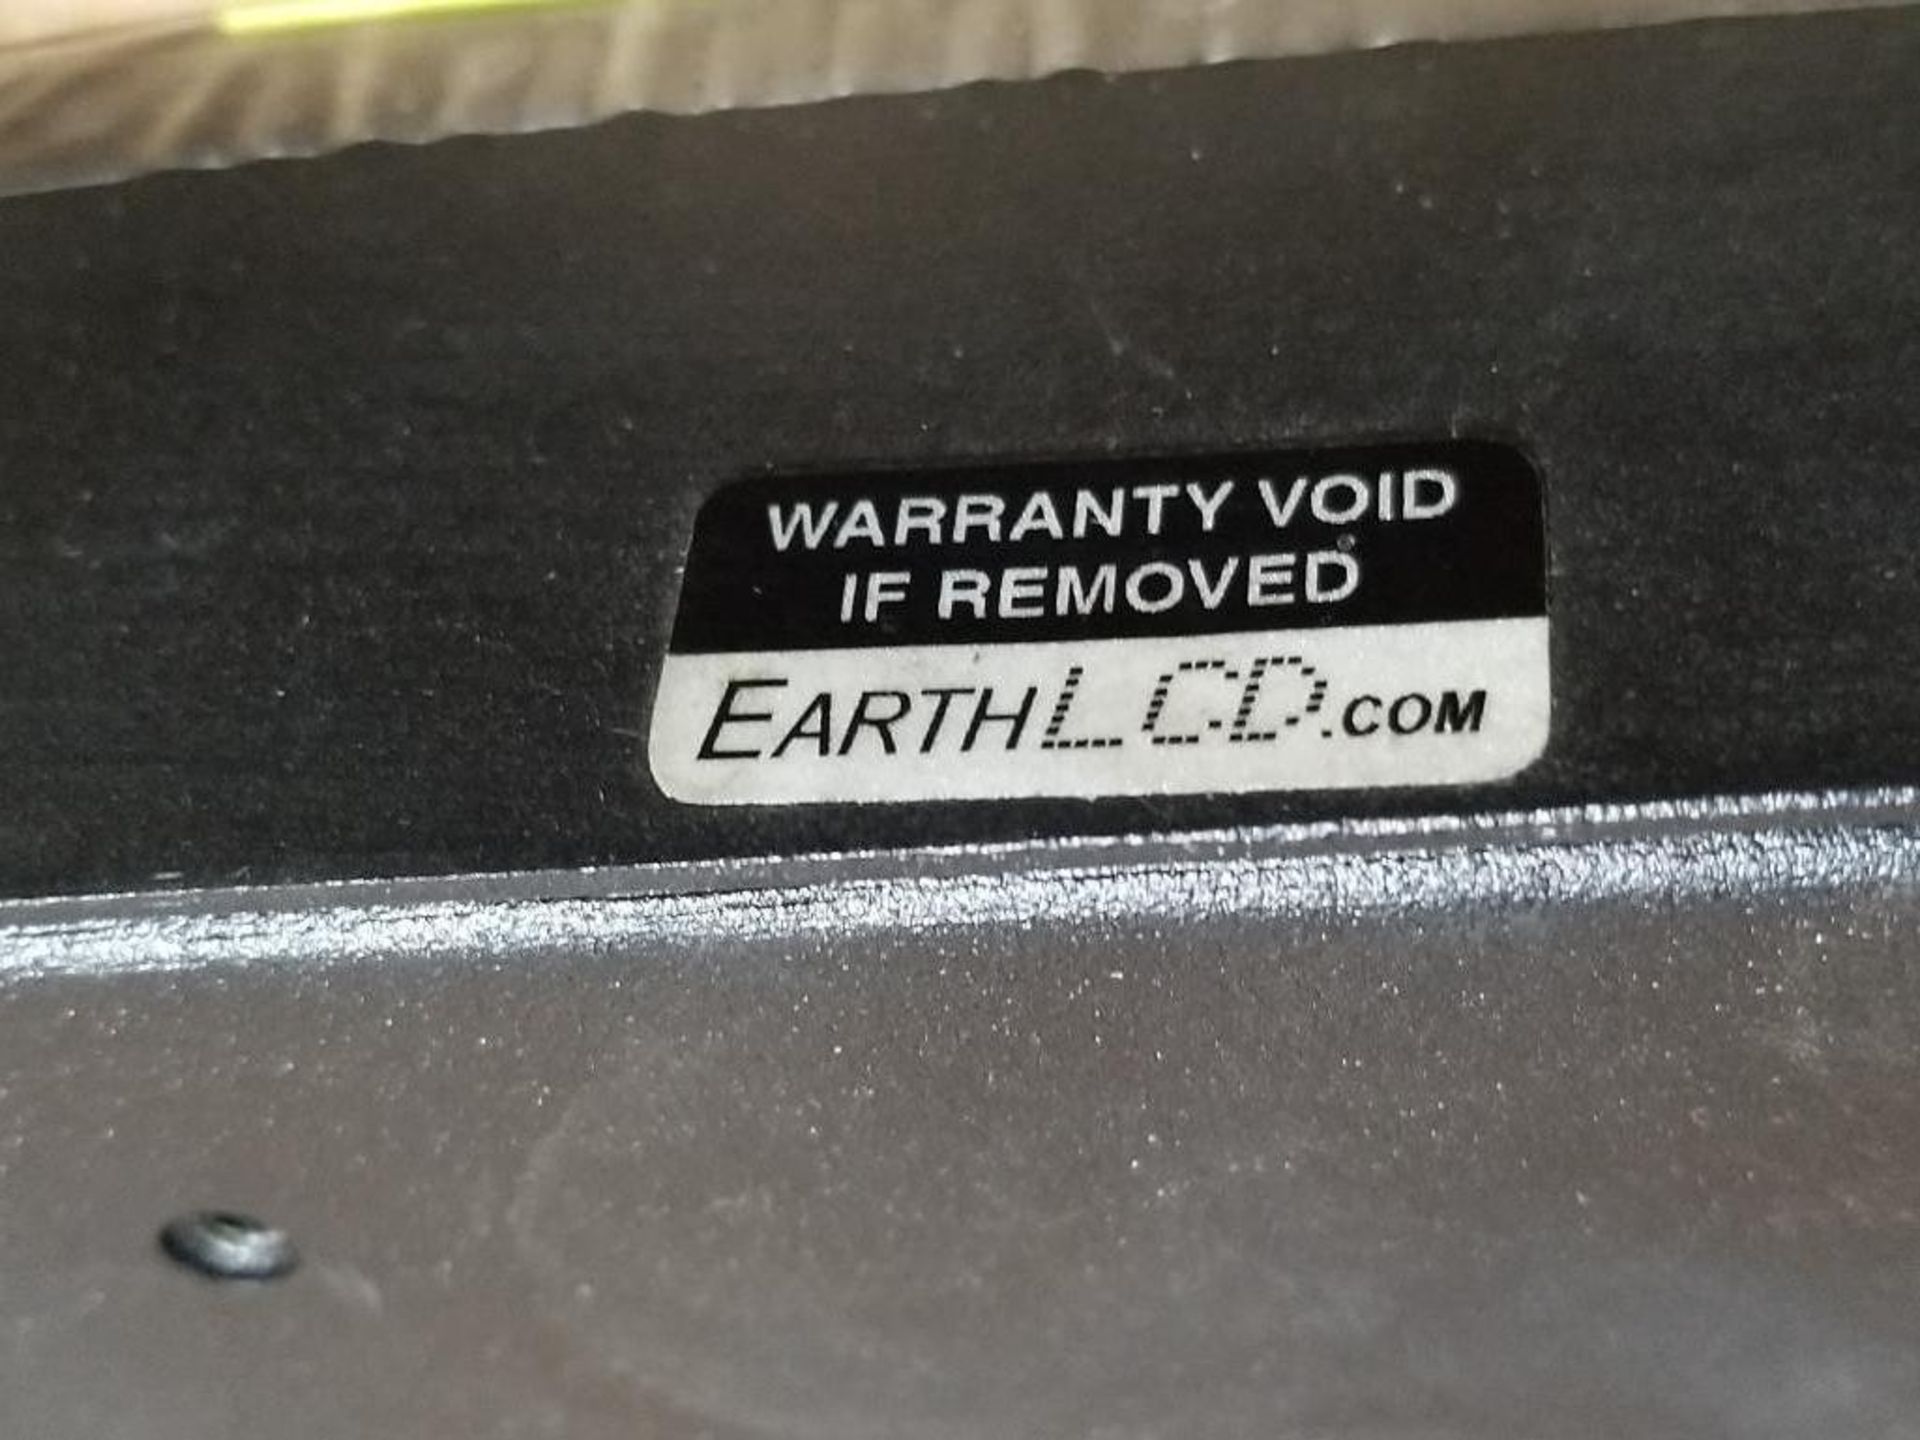 Earth LCD industrial monitor. Part number MTR-EVUE-12. - Image 5 of 6